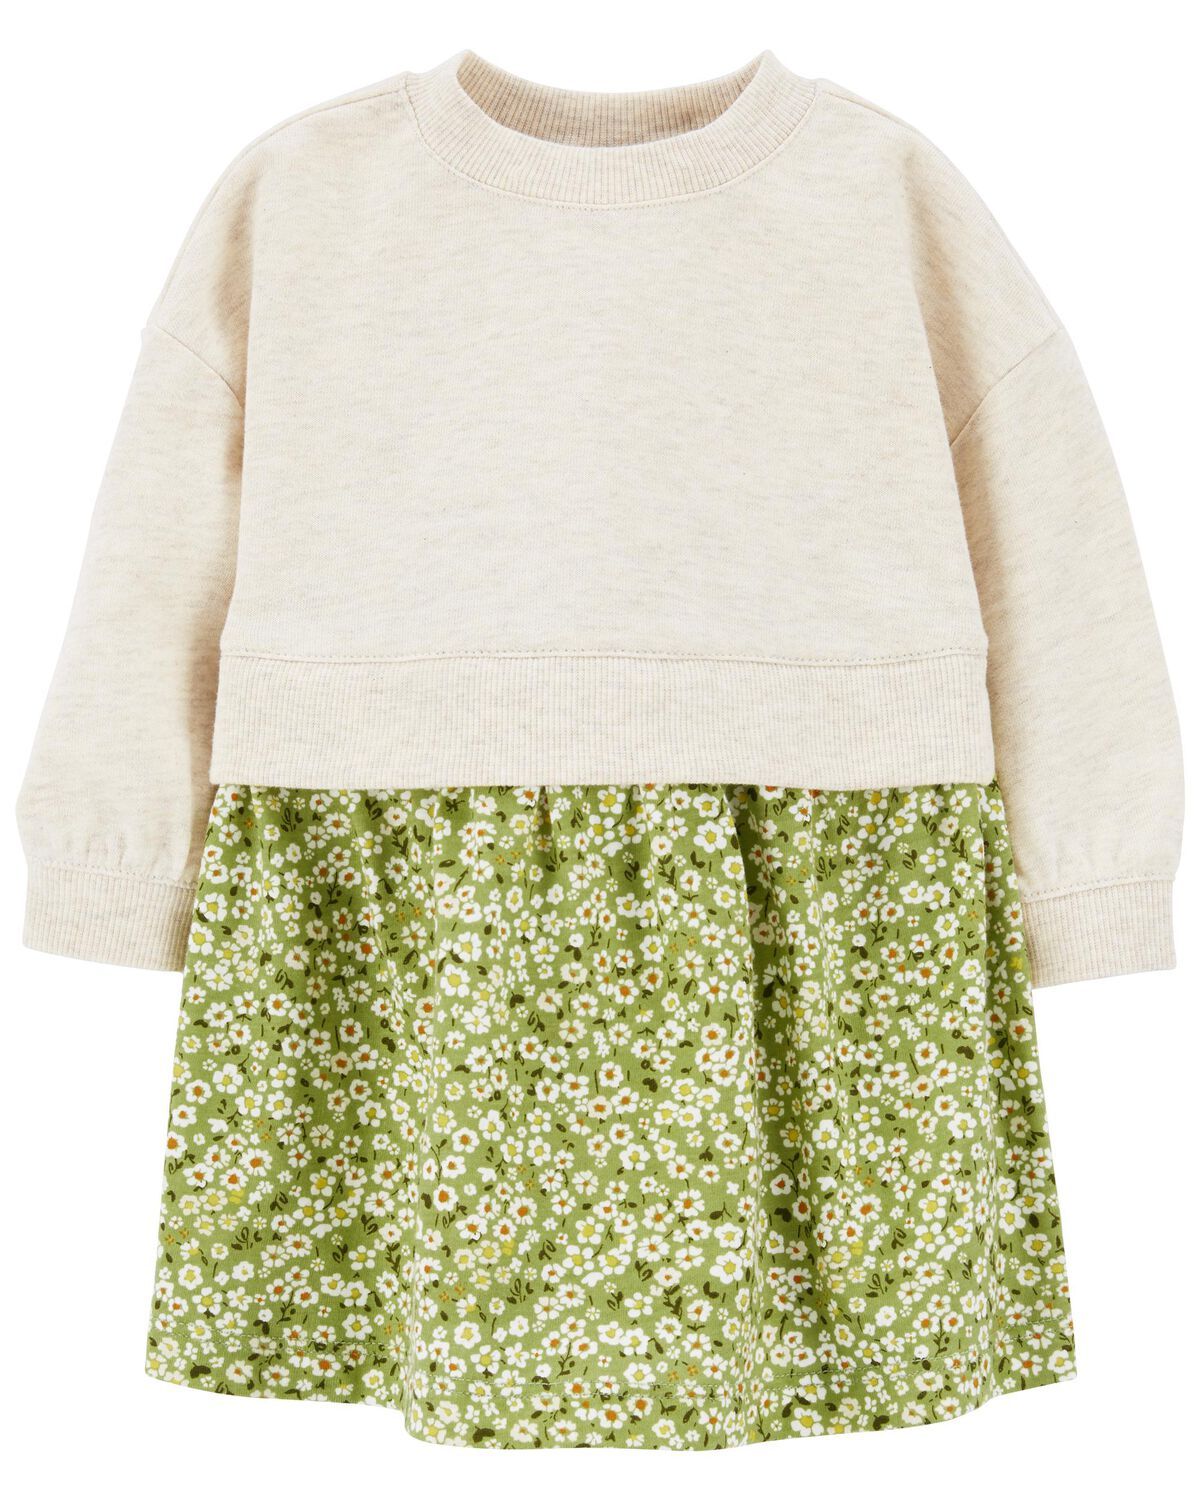 Cream/Green Baby Mixed Print French Terry Dress | carters.com | Carter's